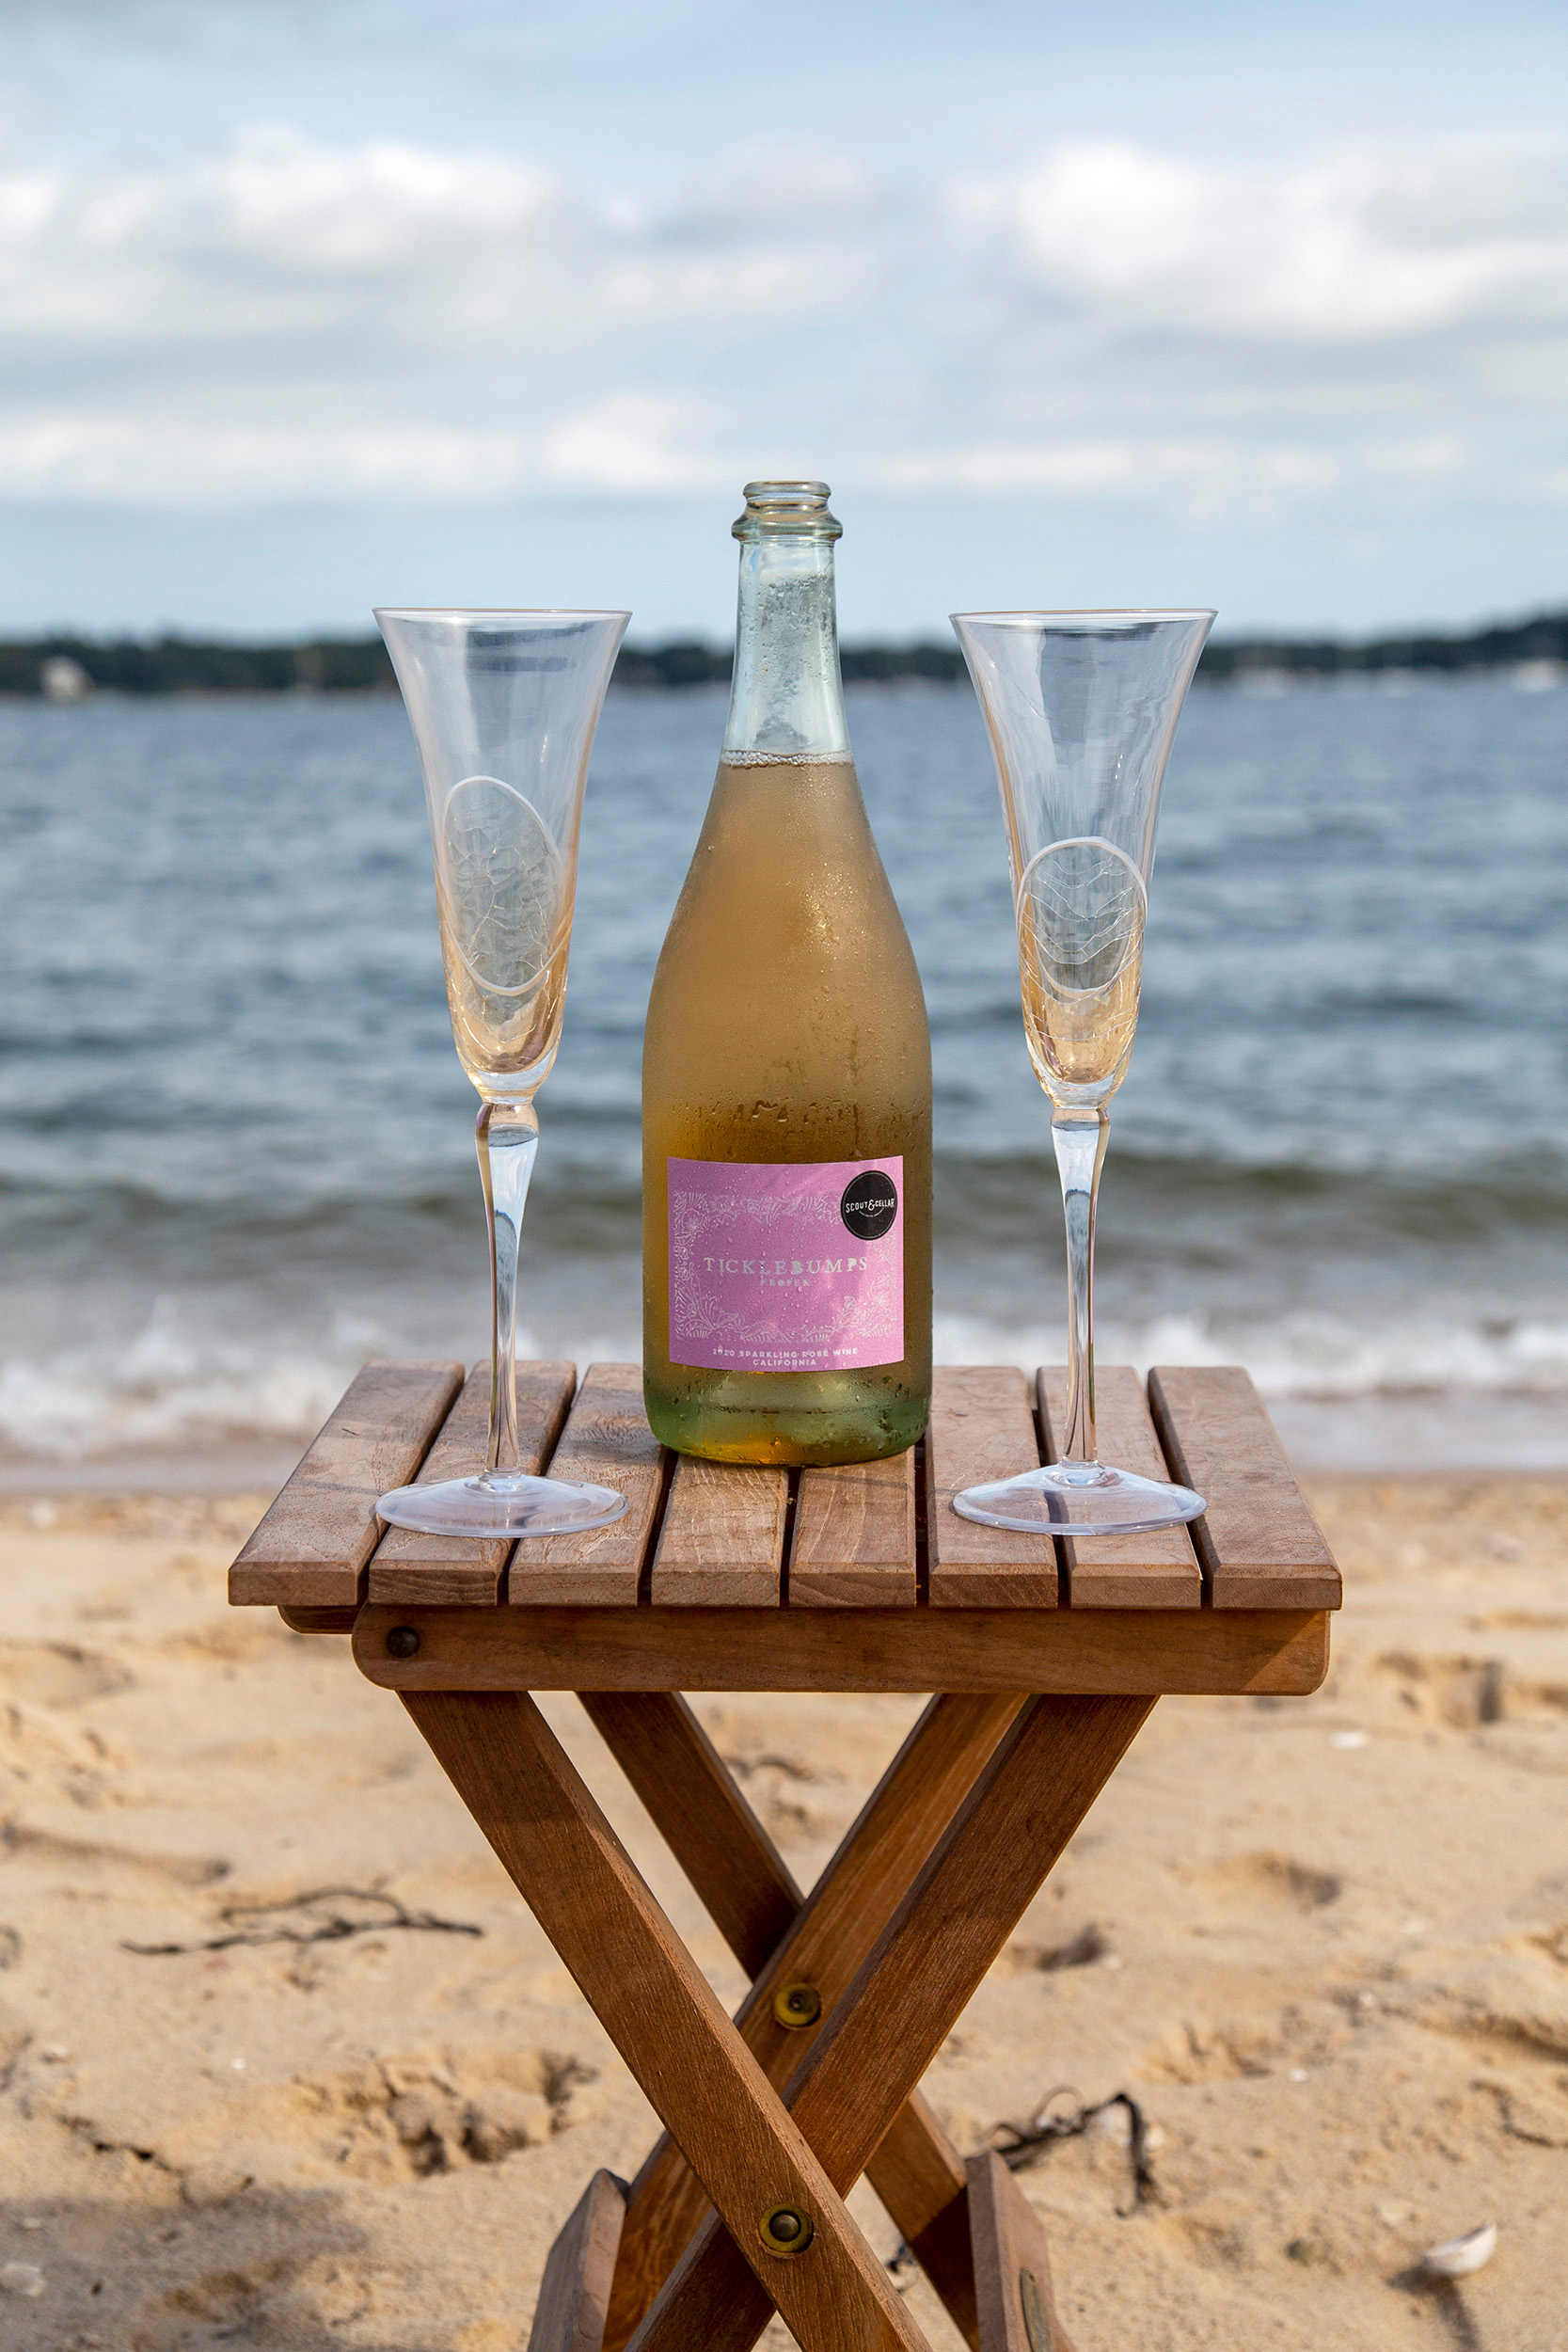 Two flute glasses on a small wooden table, with a bottle of wine in the middle. On a beach with the sea in the background